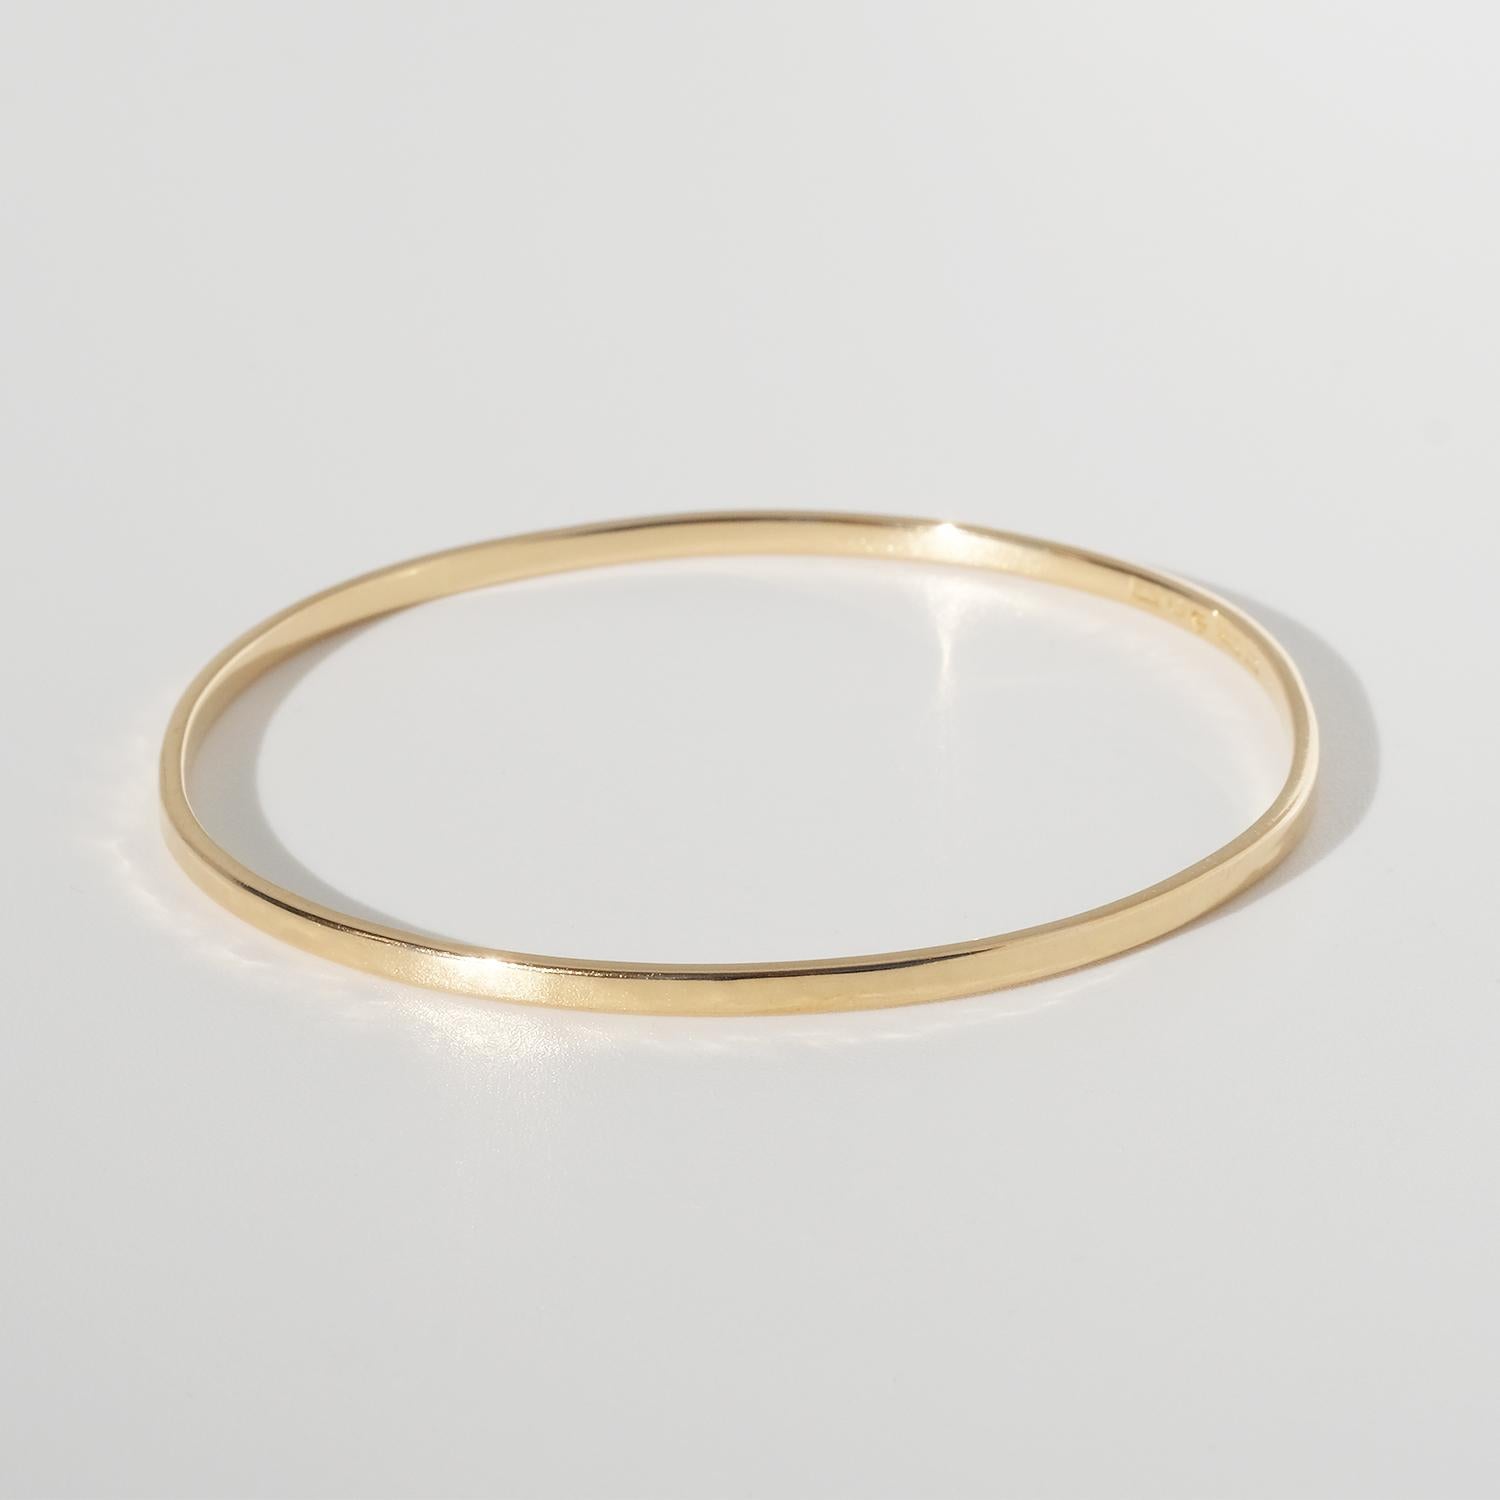 This 18 karat gold fashion bangle may be described as simple, elegant and classy. It may be worn at the office, in school or for the party. This is the perfect everyday jewelry.

Did you know that Rey Urban opened his shop in Stockholm, Sweden in